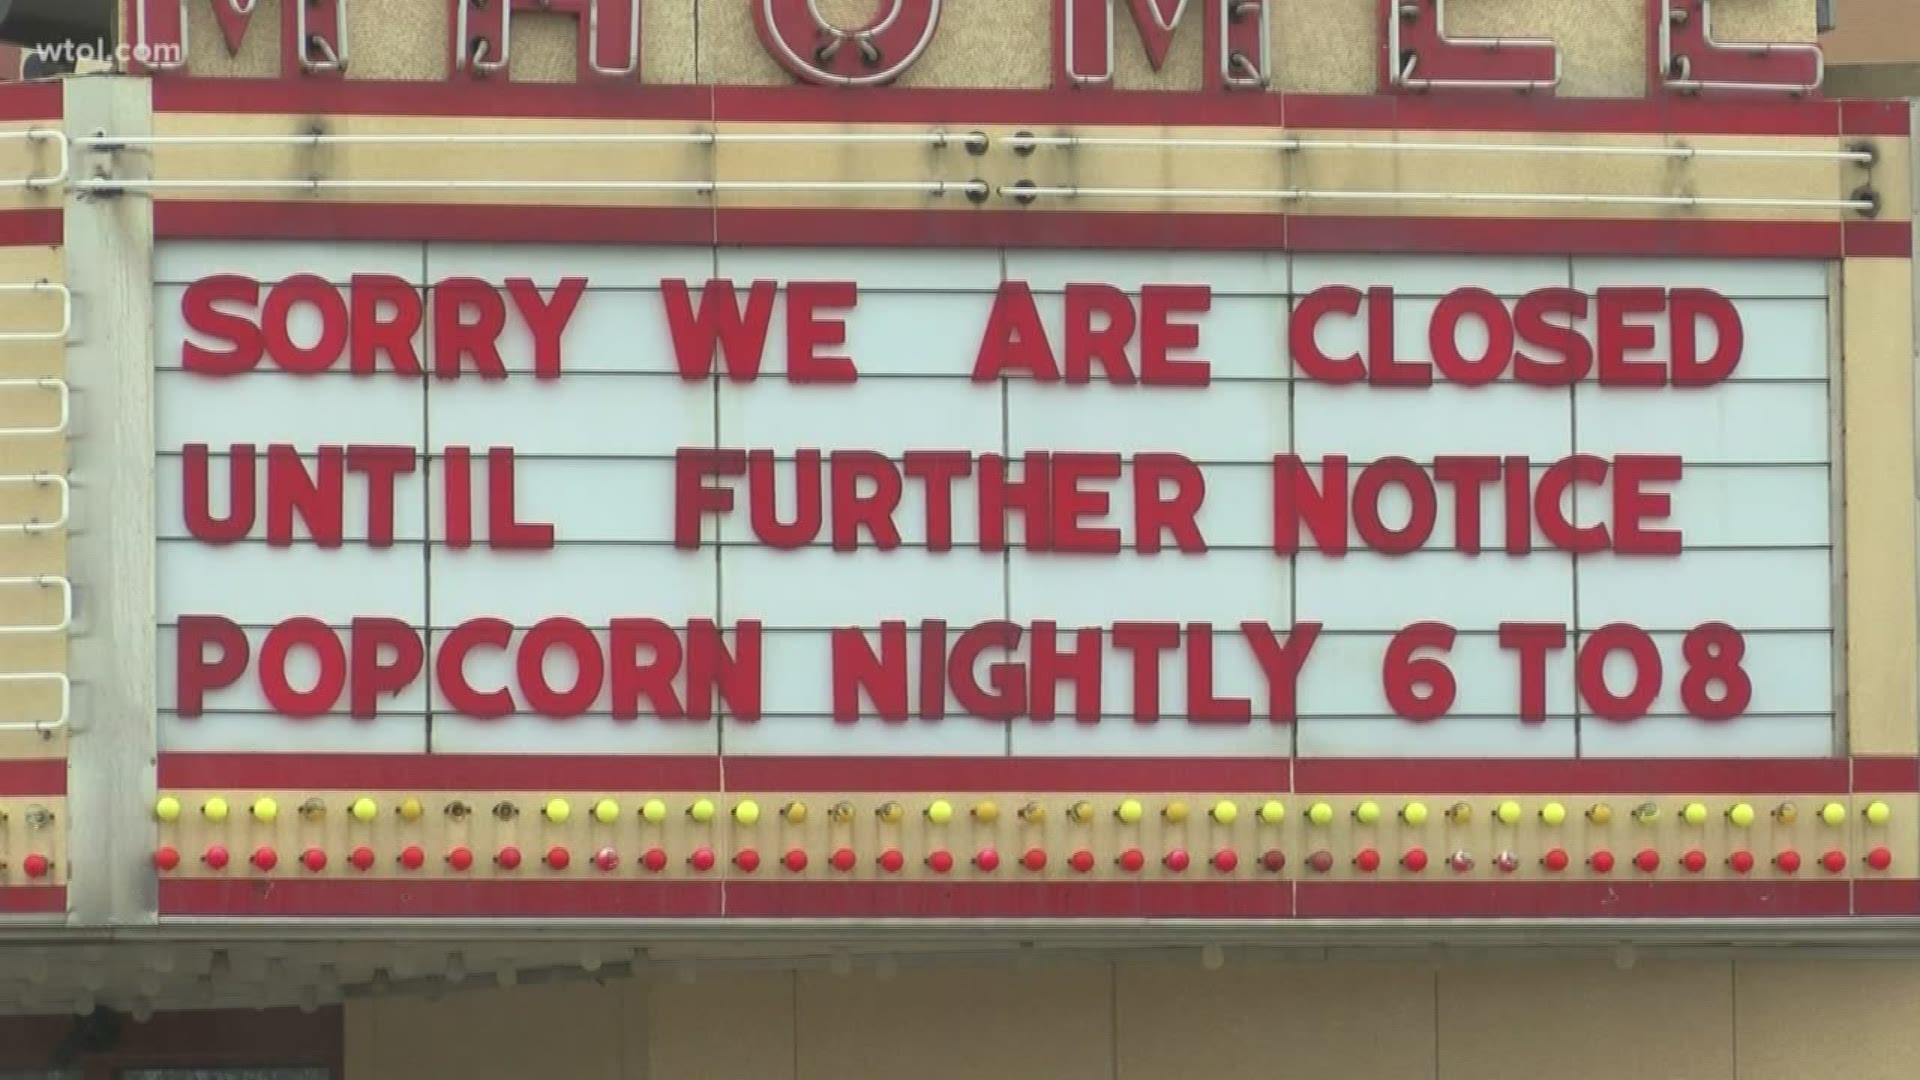 Maumee Indoor Theatre offering popcorn and traditional theatre snacks while closed due to coronavirus for stay-at-home moviegoers.